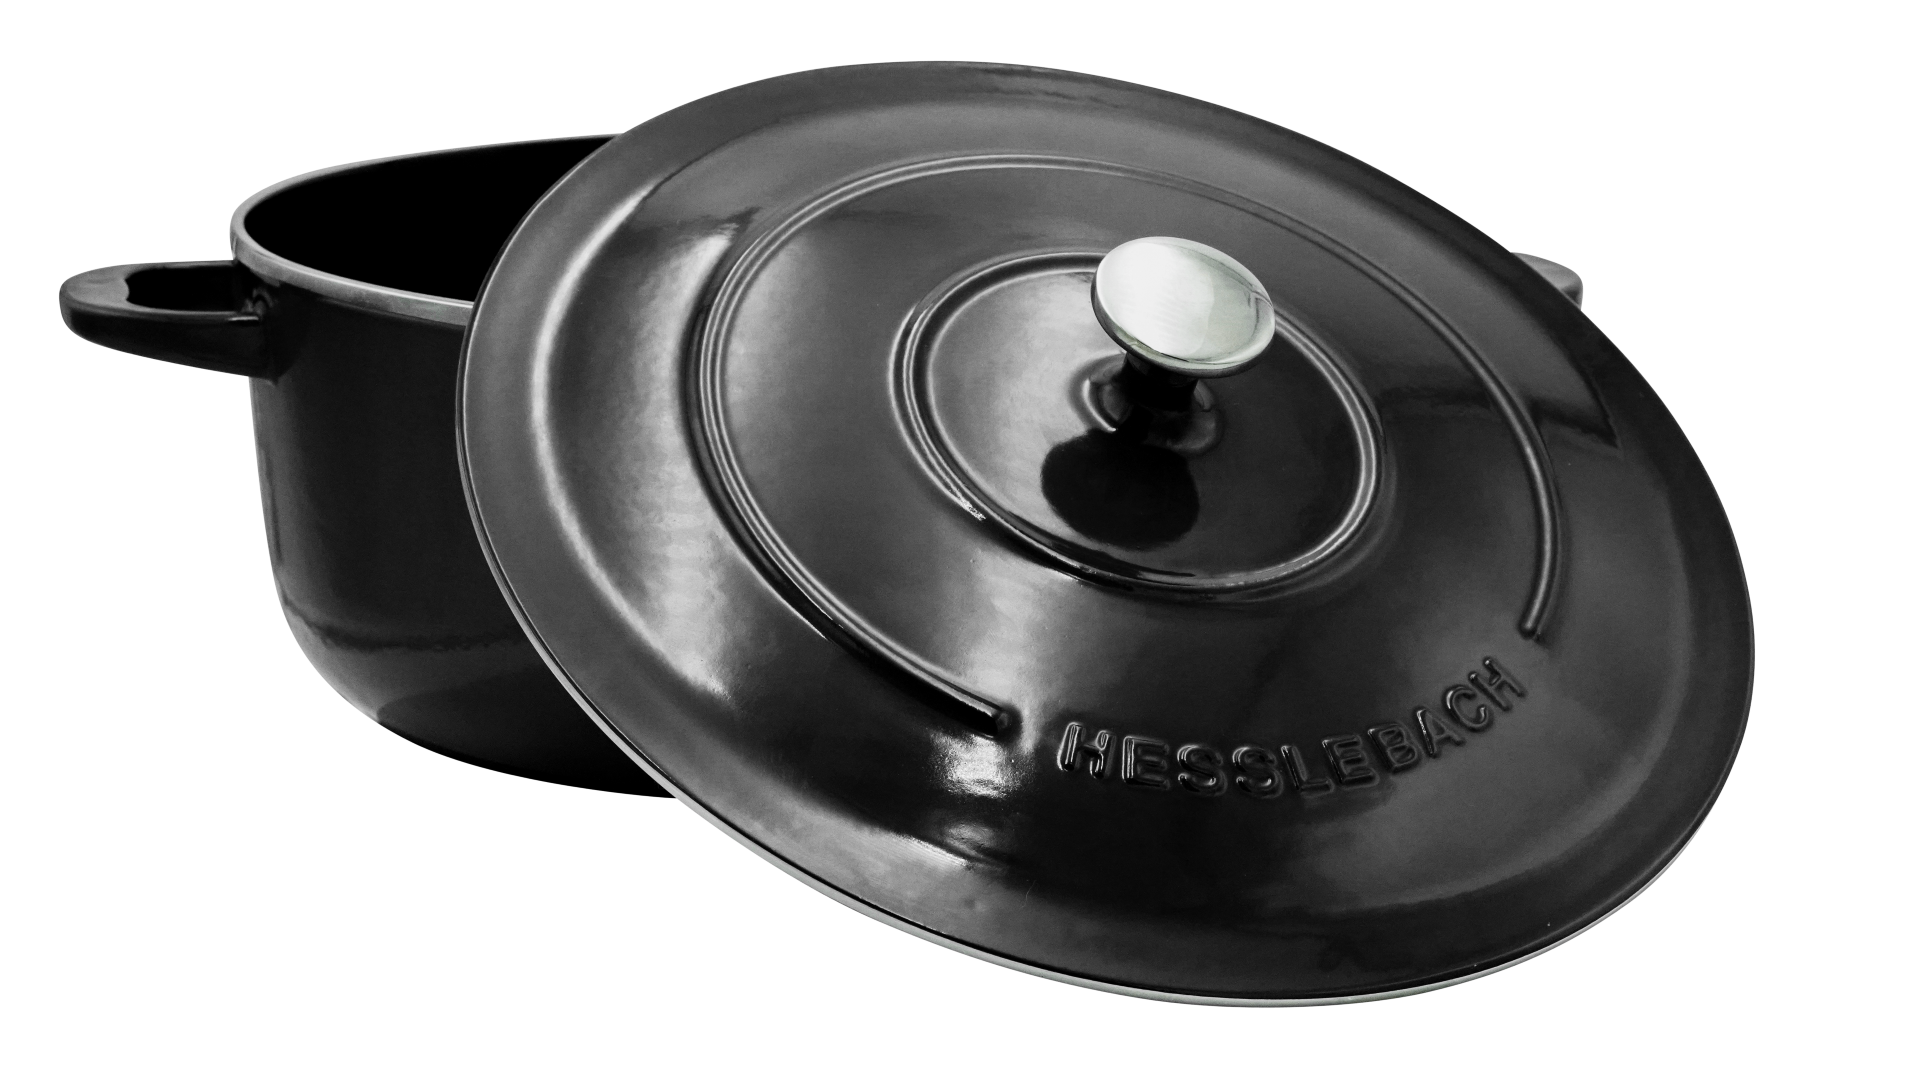 Hesslebach Cookware 10 inch Grill Pan Unique State-of-the-Art